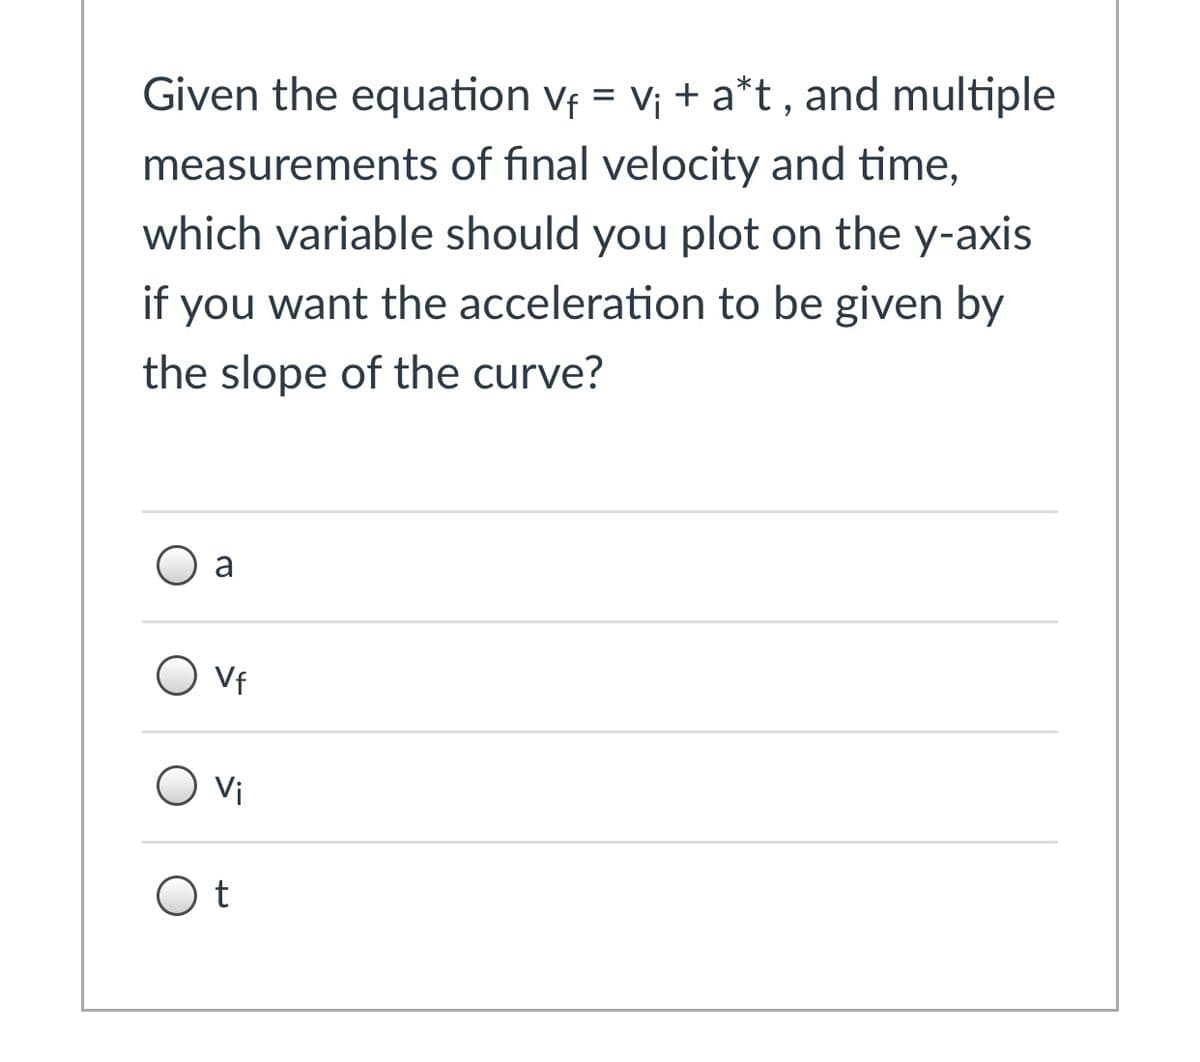 Given the equation vf = v¡ + a*t, and multiple
measurements of final velocity and time,
which variable should you plot on the y-axis
if you want the acceleration to be given by
the slope of the curve?
O a
Vf
vi
O t
